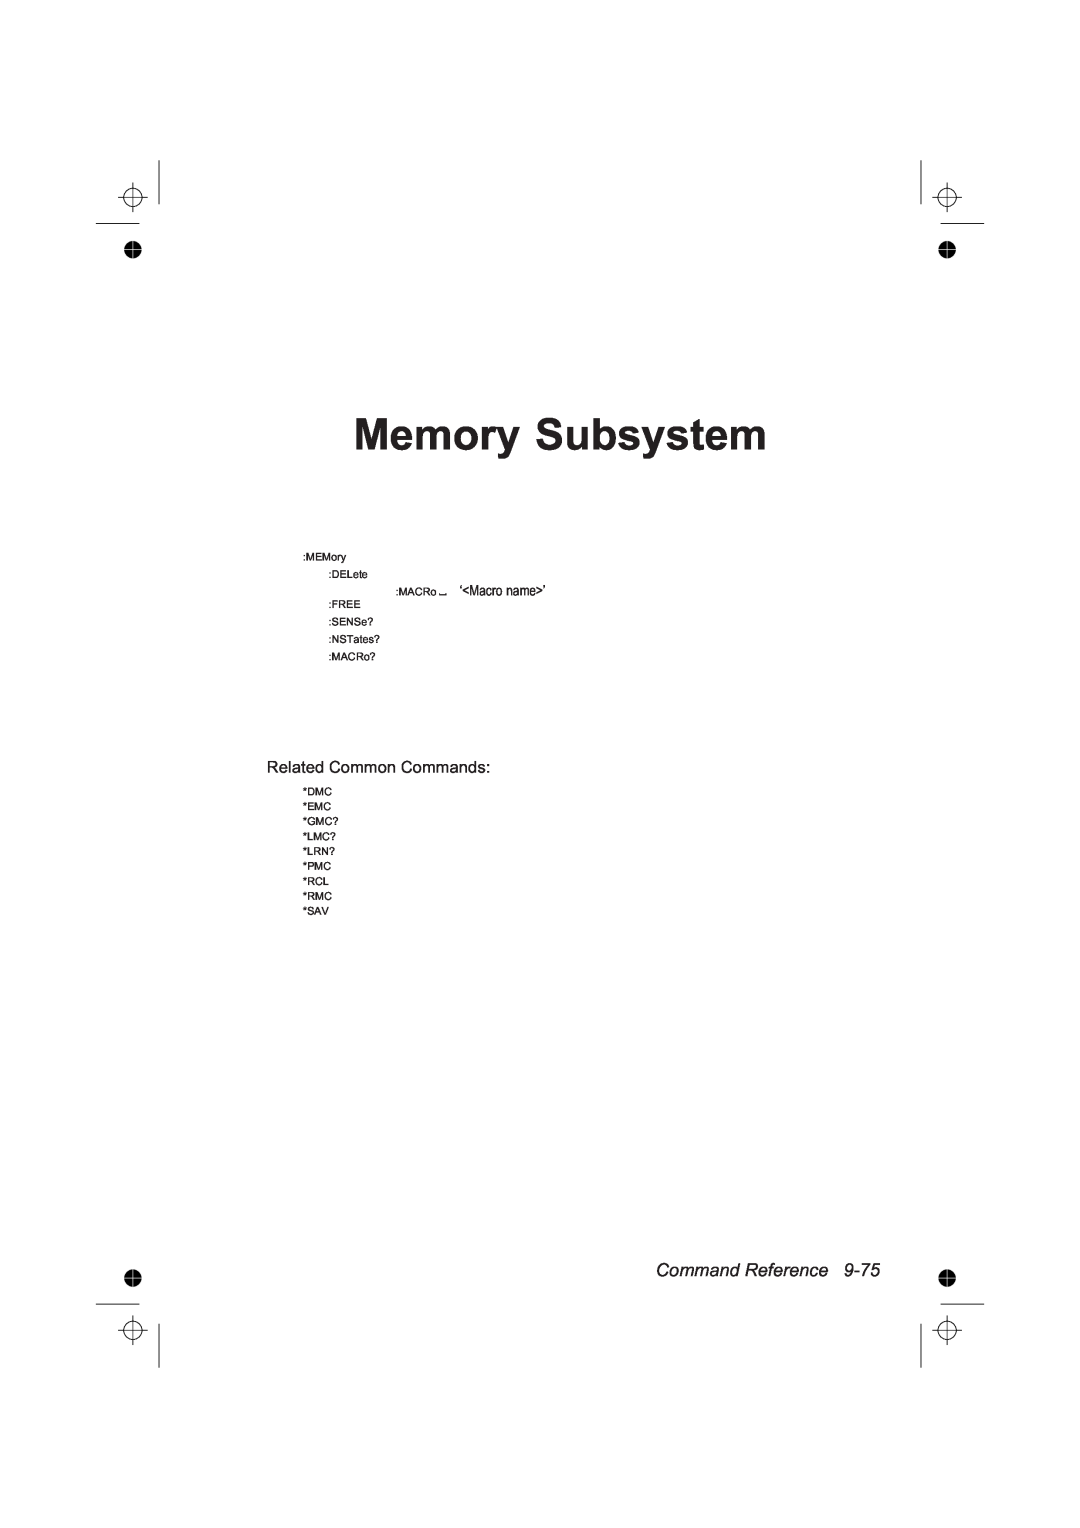 Fluke PM6681R, PM6685R manual Memory Subsystem, Command Reference, Related Common Commands 